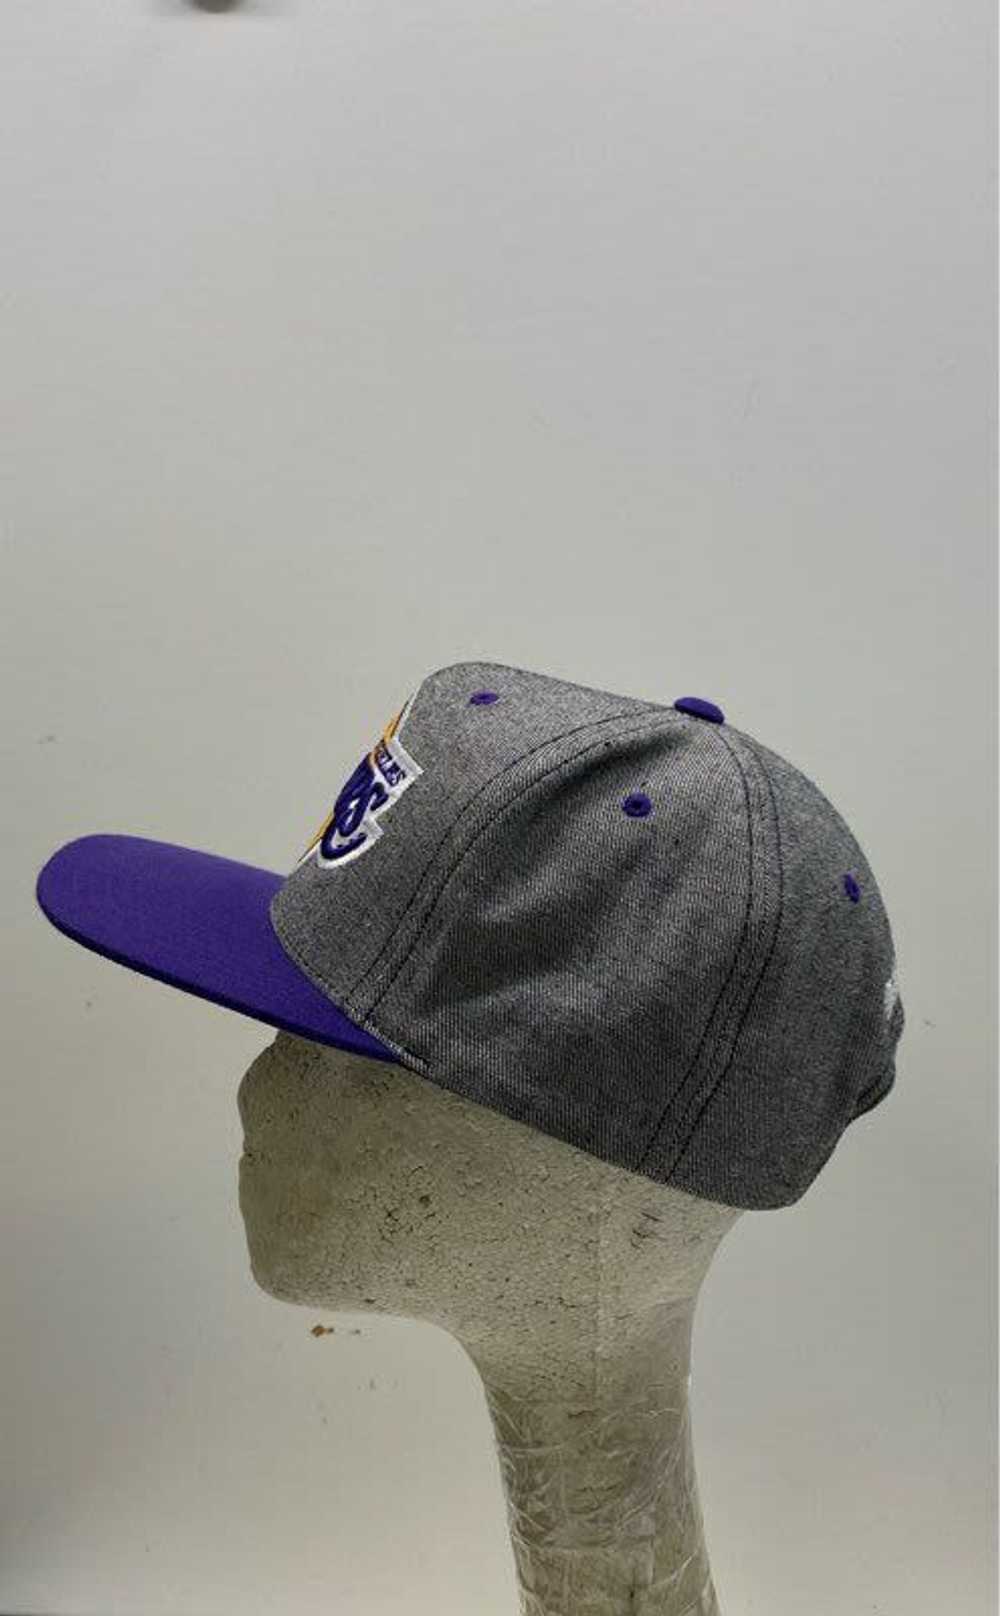 Mitchell & Ness Los Angeles Lakers Snapback Cap - image 4